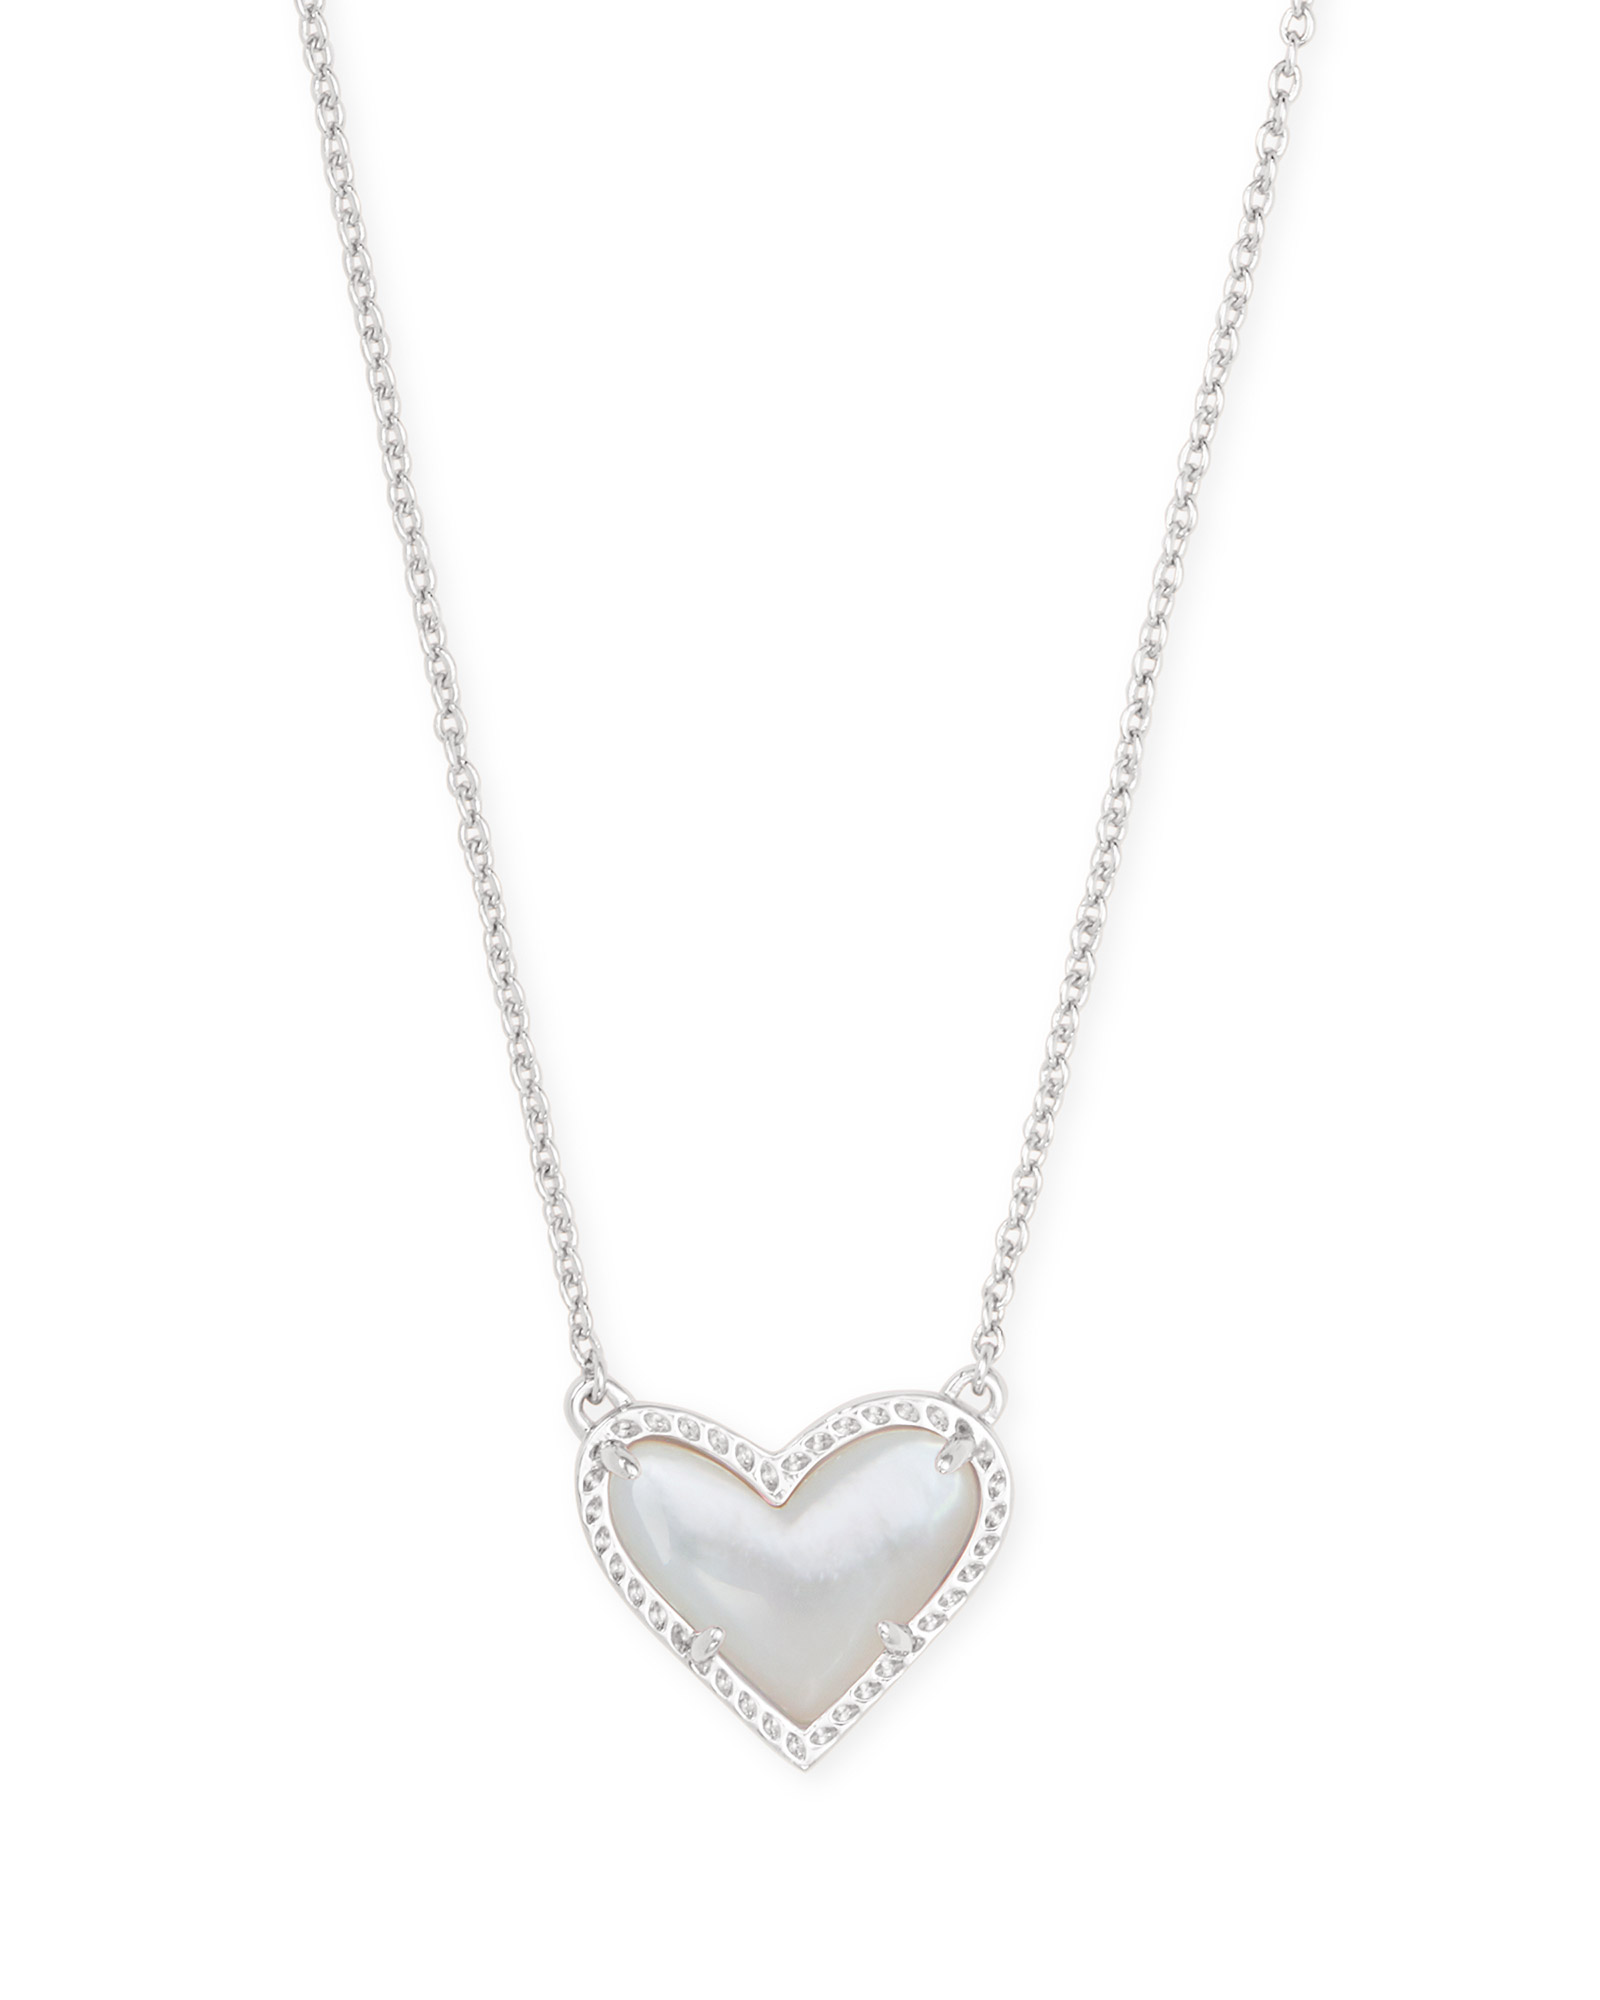 Ari Heart Silver Pendant Necklace in Ivory Mother-of-Pearl | Kendra Scott